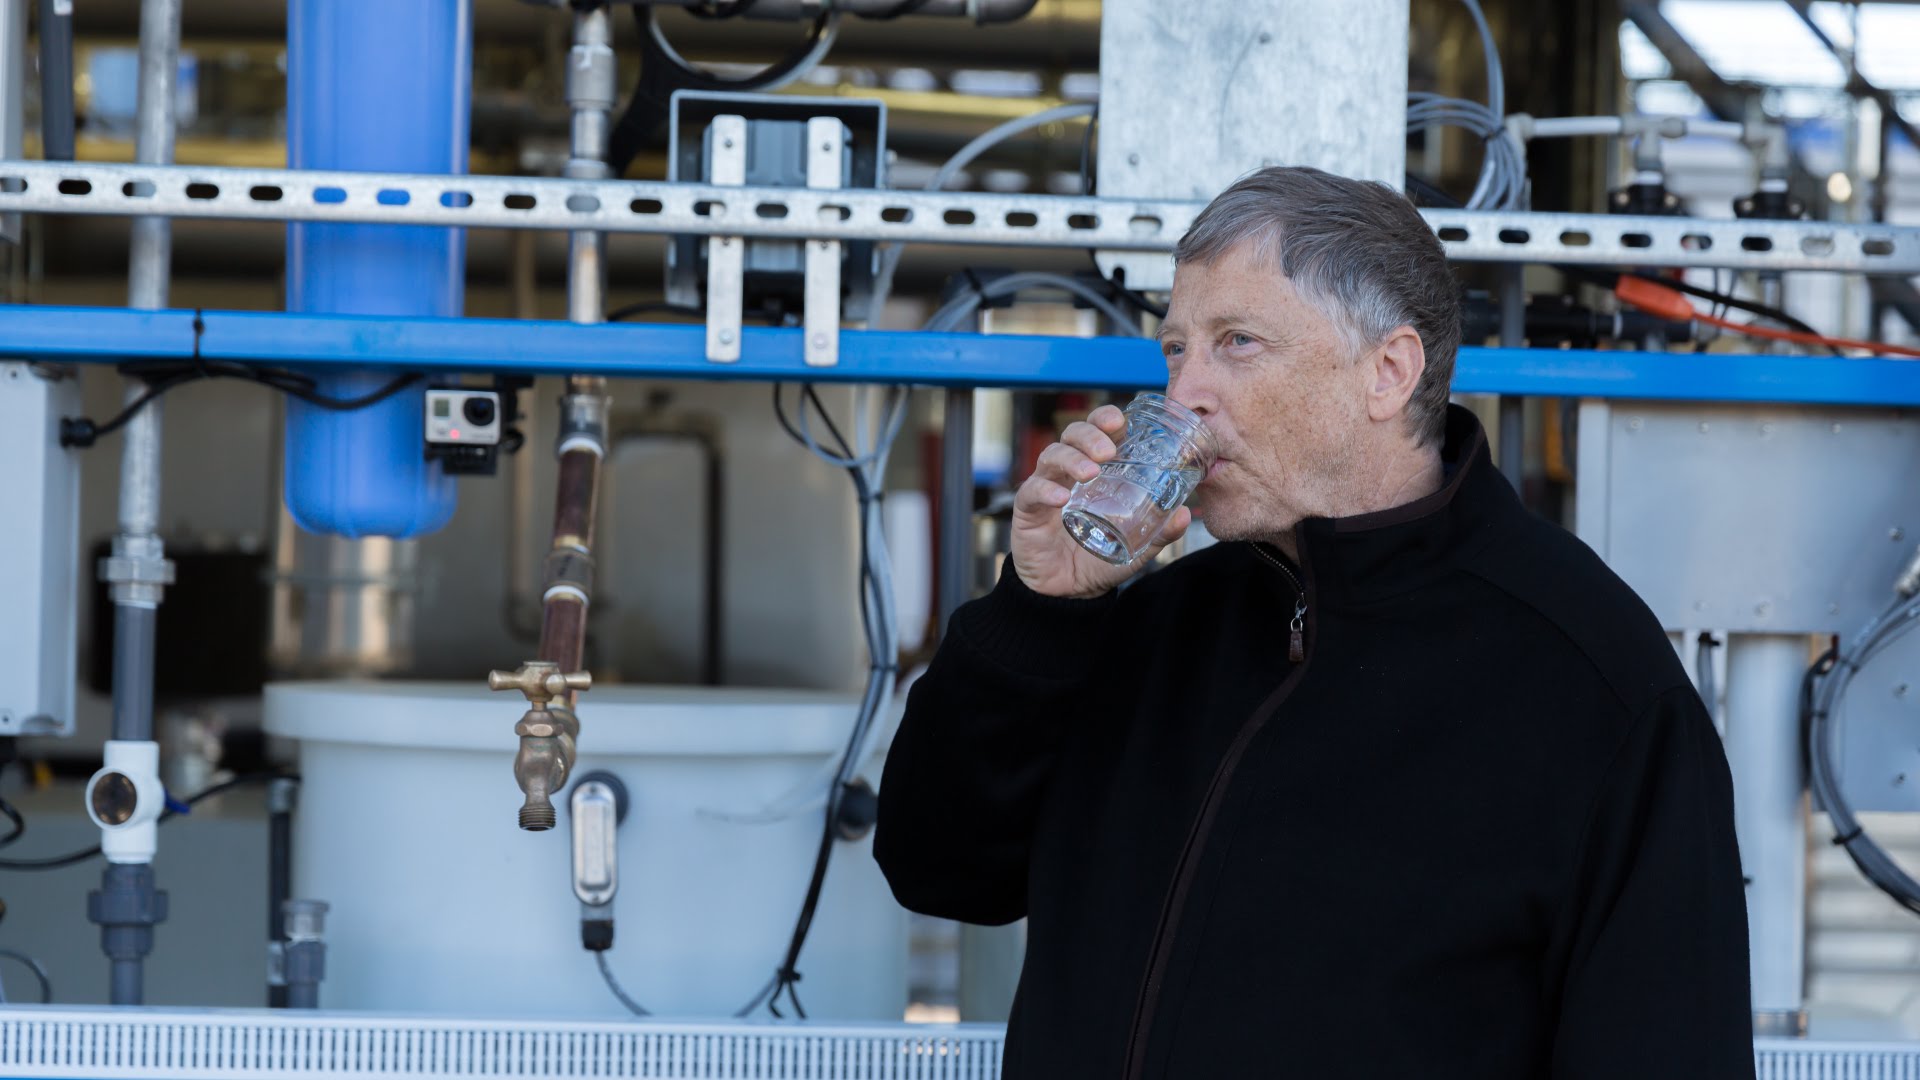 Bill Gates Thinks Omni Processor’s Potable Water From Human Waste is Delicious…